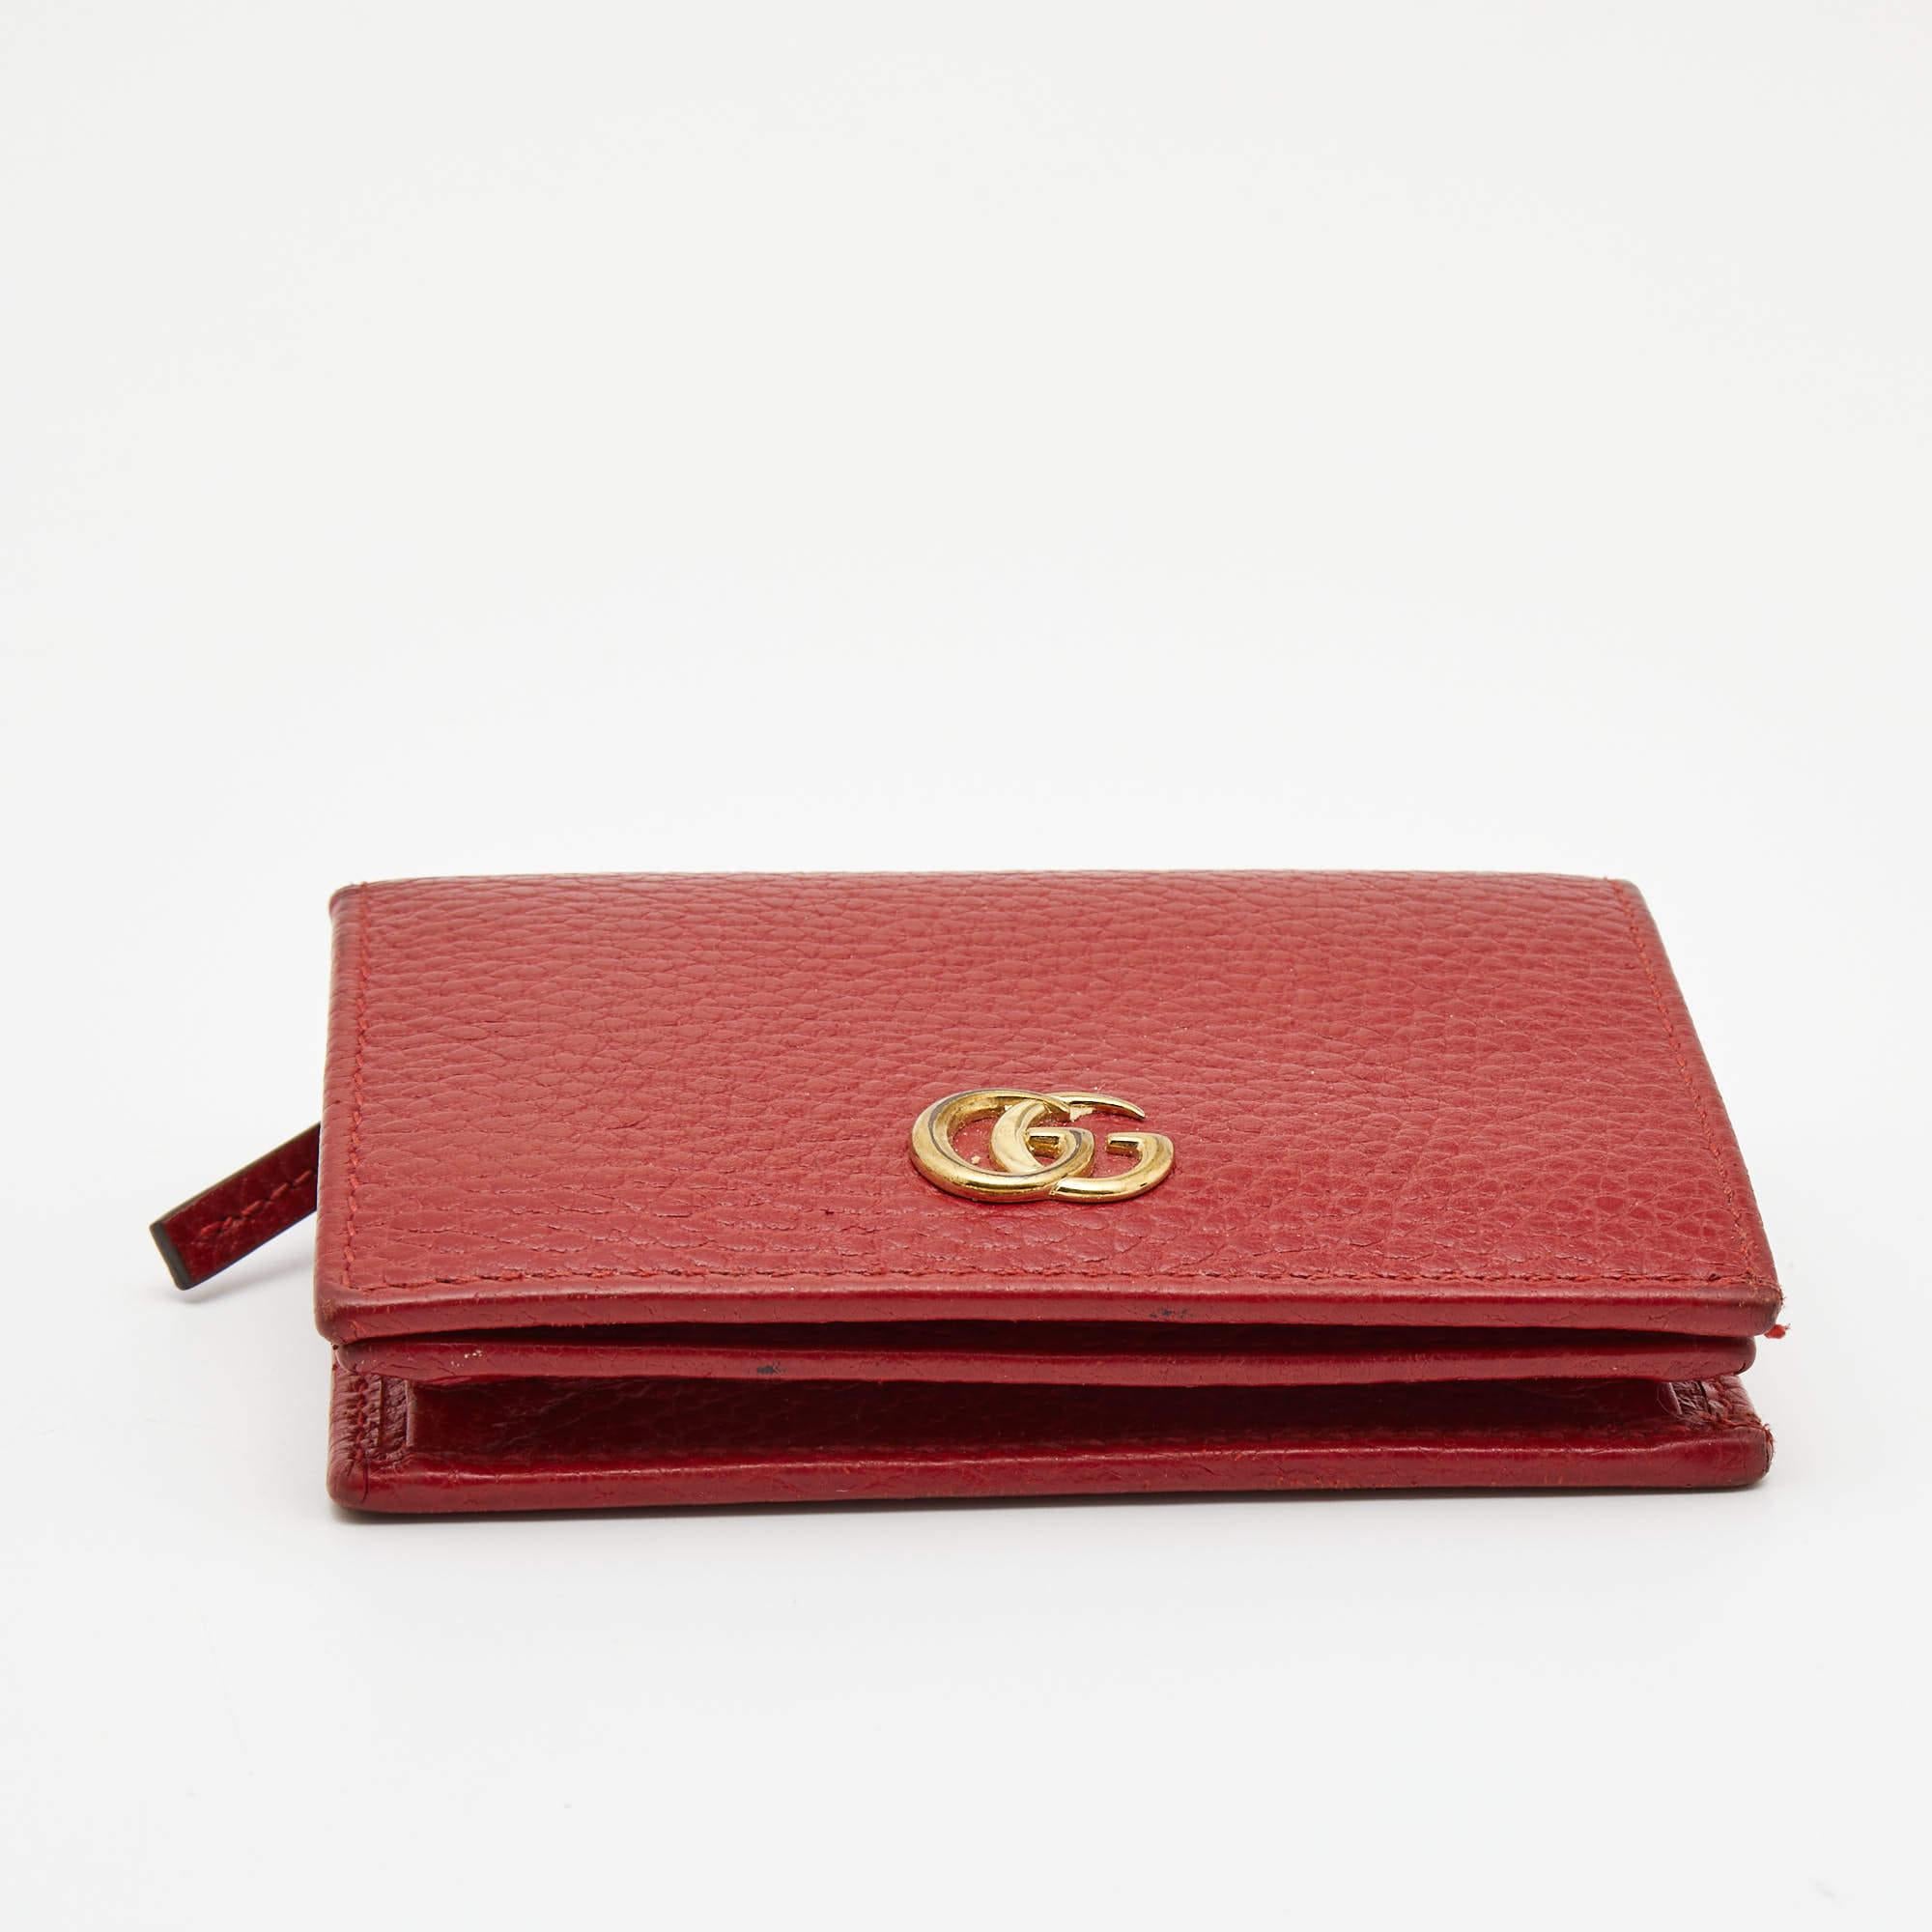 Women's Gucci Red Leather GG Marmont Flap Card Case